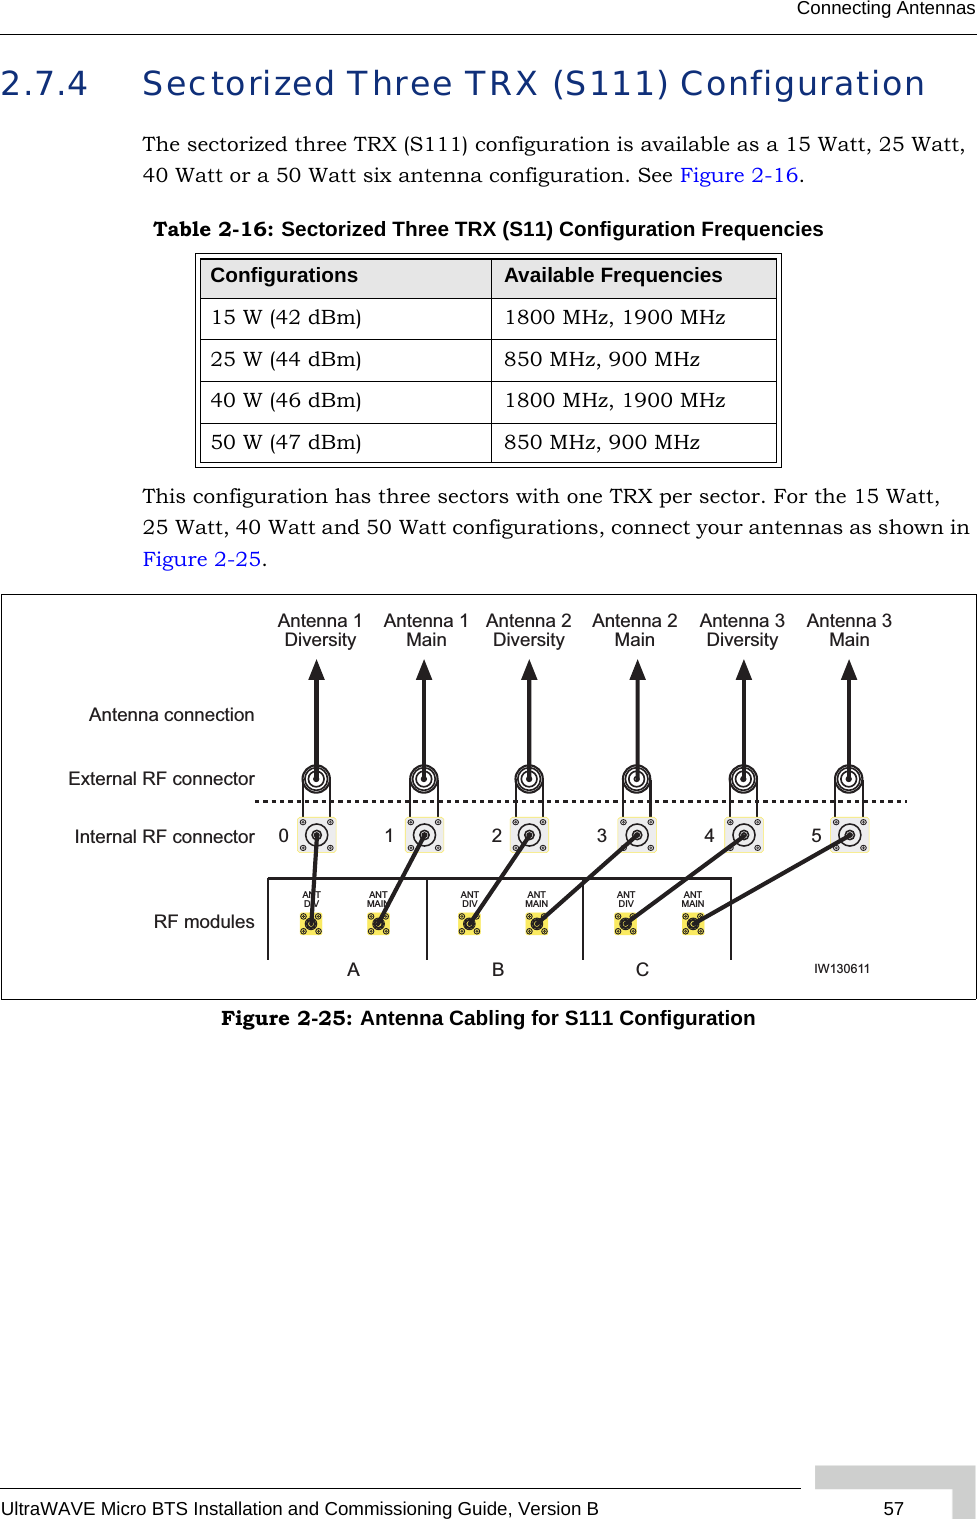 UltraWAVE Micro BTS Installation and Commissioning Guide, Version B 57Connecting Antennas2.7.4 Sectorized Three TRX (S111) ConfigurationThe sectorized three TRX (S111) configuration is available as a 15 Watt, 25 Watt, 40 Watt or a 50 Watt six antenna configuration. See Figure 2-16.This configuration has three sectors with one TRX per sector. For the 15 Watt, 25 Watt, 40 Watt and 50 Watt configurations, connect your antennas as shown in Figure 2-25.Table 2-16: Sectorized Three TRX (S11) Configuration FrequenciesConfigurations Available Frequencies15 W (42 dBm) 1800 MHz, 1900 MHz25 W (44 dBm) 850 MHz, 900 MHz40 W (46 dBm) 1800 MHz, 1900 MHz50 W (47 dBm) 850 MHz, 900 MHzFigure 2-25: Antenna Cabling for S111 ConfigurationANTDIVANTMAINANTDIVANTMAINRF modulesInternal RF connectorExternal RF connectorAntenna 1DiversityAntenna connection1 2 3 4 50Antenna 1MainAntenna 2MainAntenna 2DiversityANTDIVANTMAINAntenna 3MainAntenna 3DiversityIW130611ABC